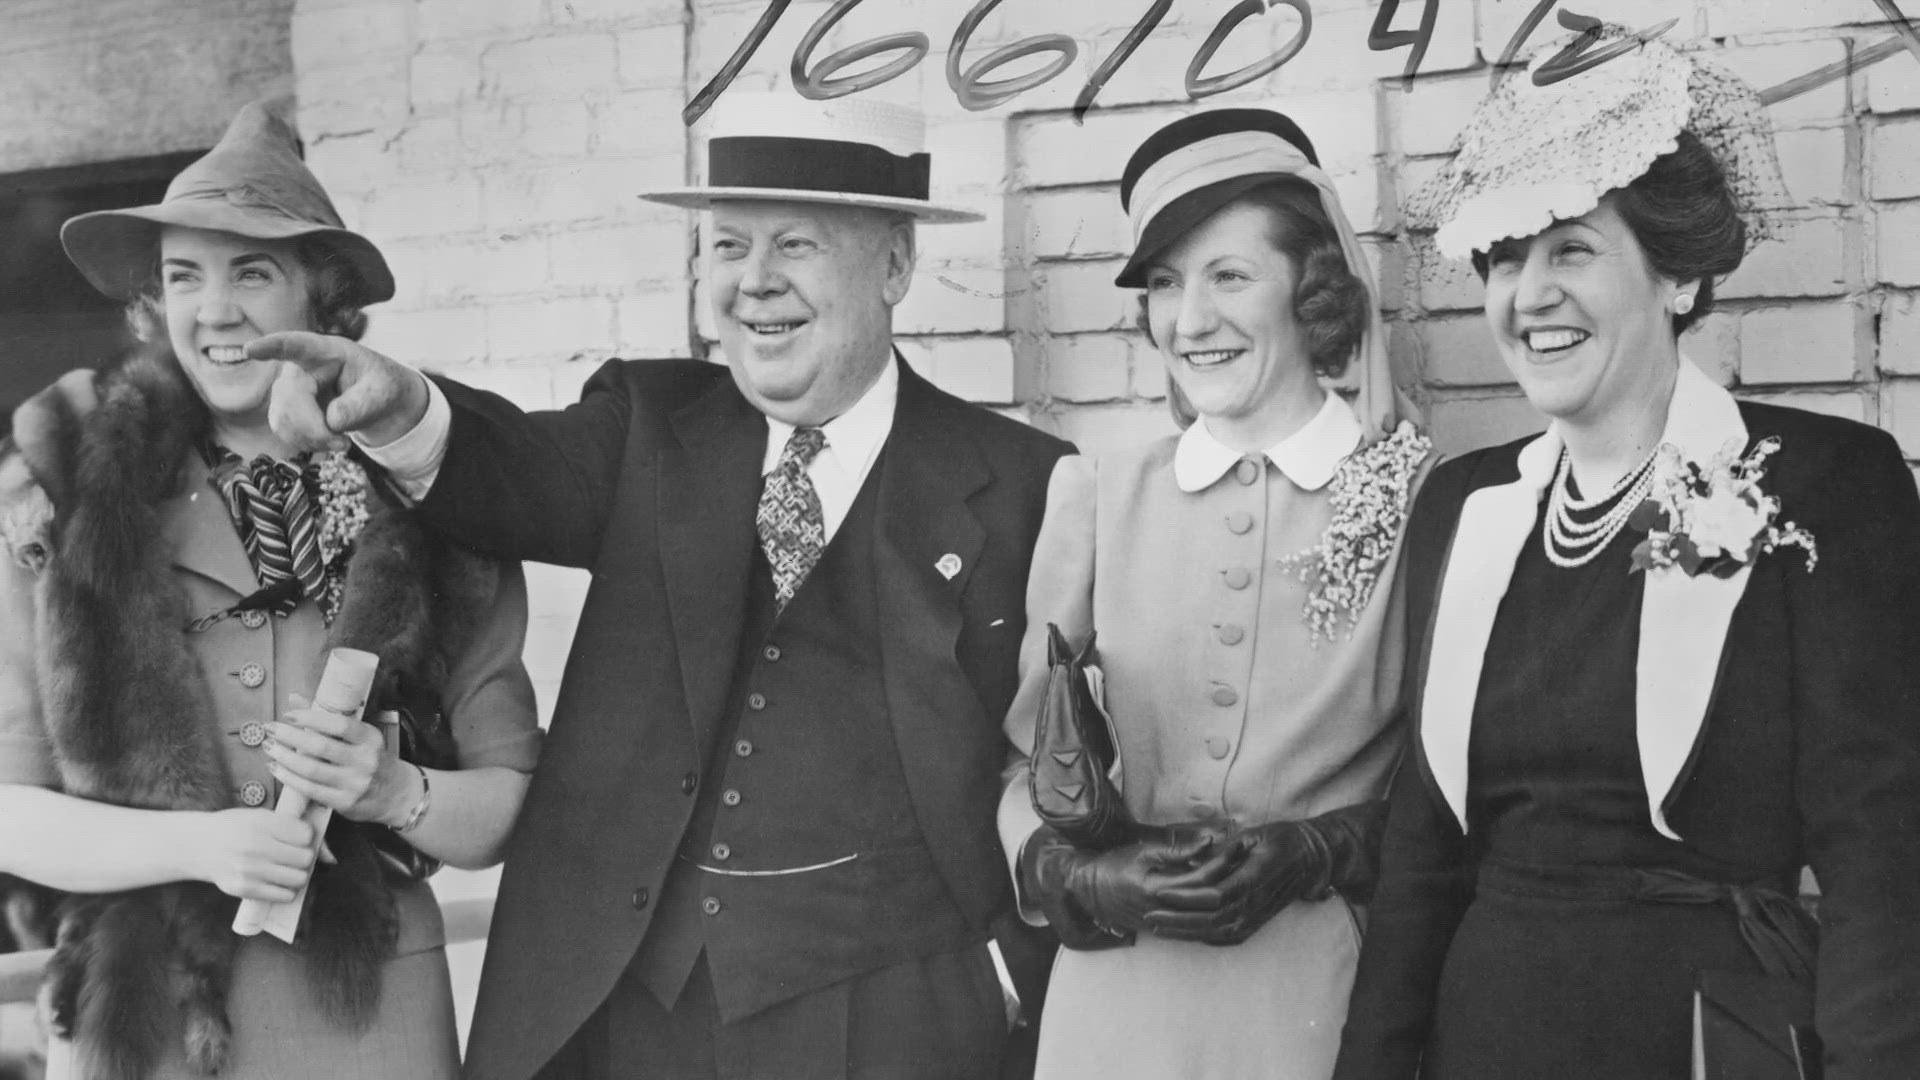 Fashion has changed a lot since the first Kentucky Derby in 1875, but one thing has been constant -- visitors, vying for the spotlight with iconic ensembles.